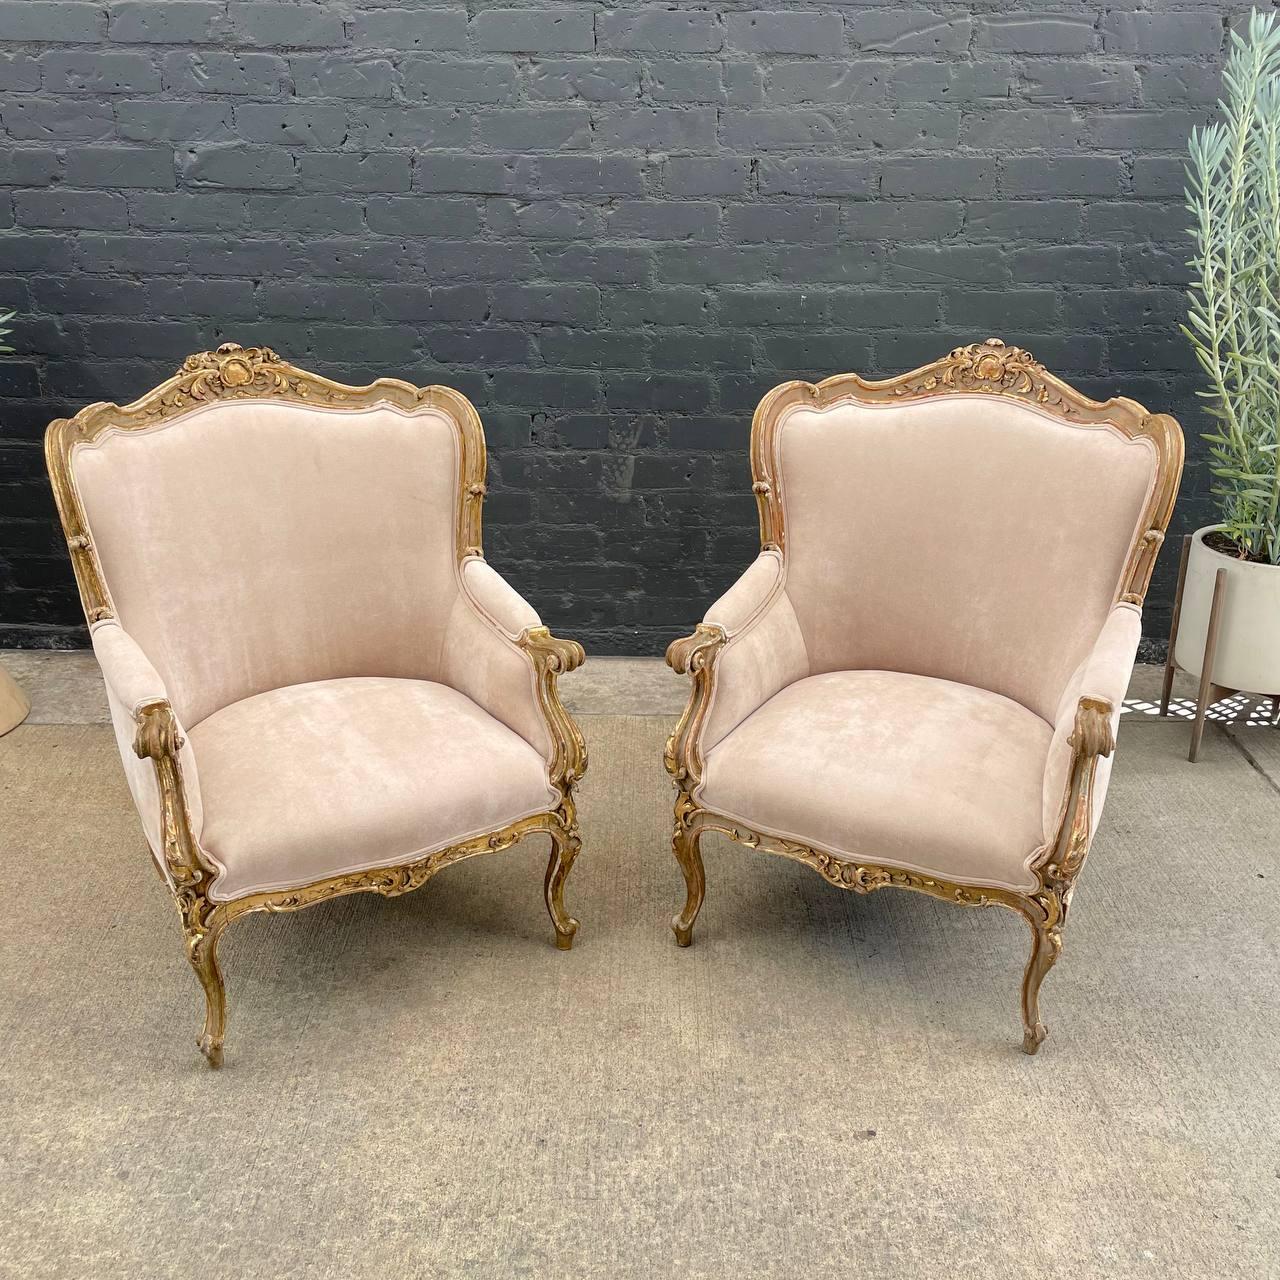 Pair of French Louis XV Style Painted & Parcel-Gilt Armchairs  In Good Condition For Sale In Los Angeles, CA